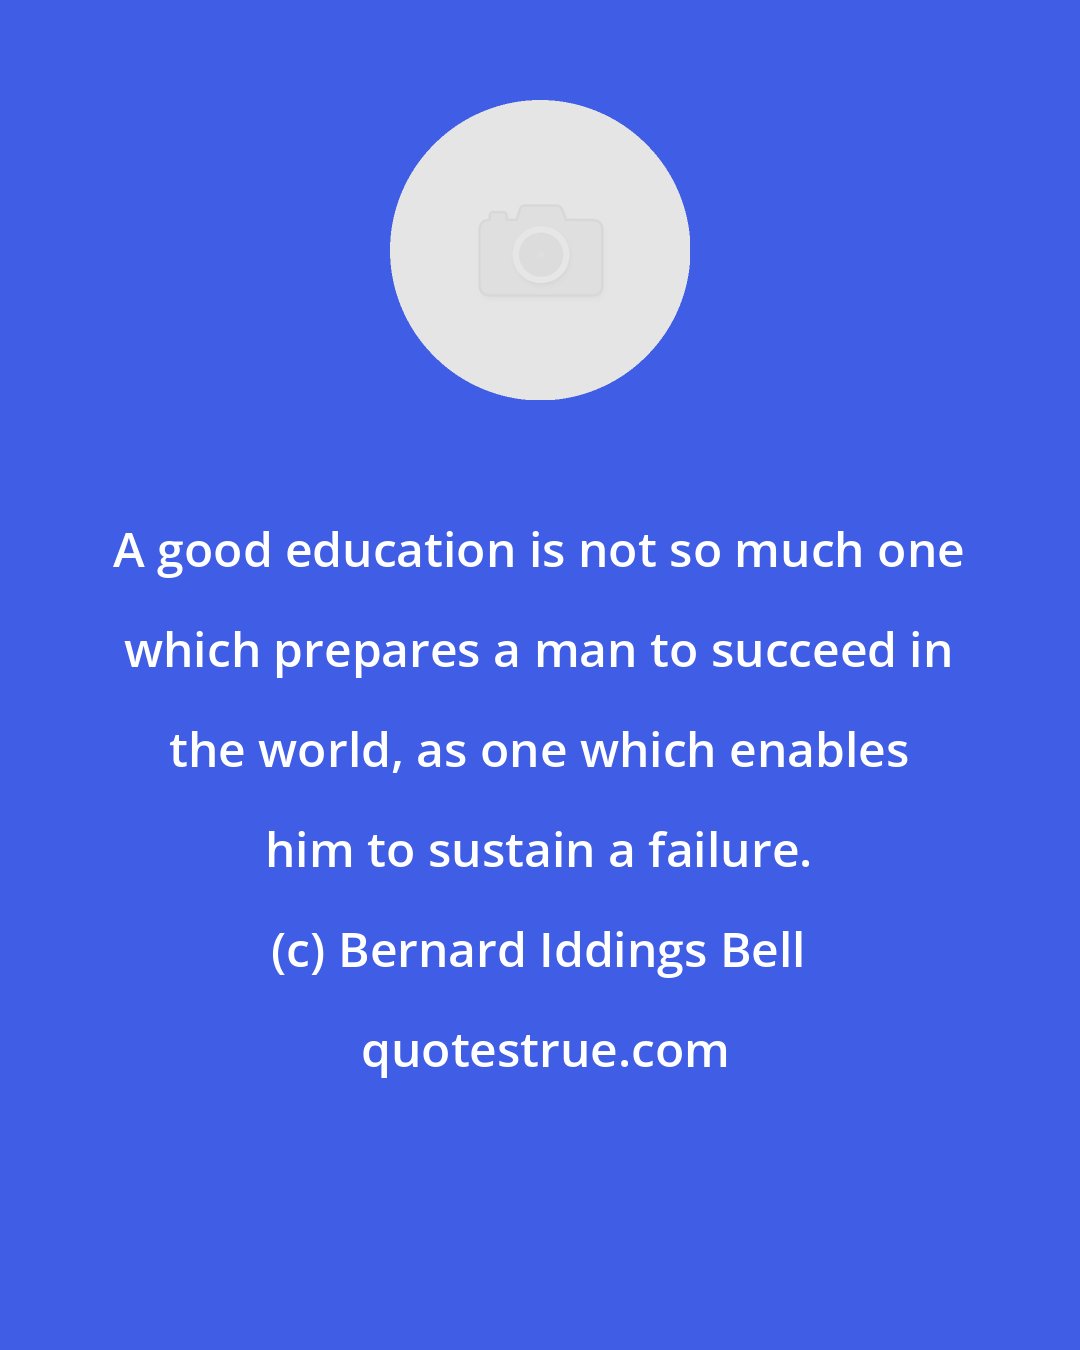 Bernard Iddings Bell: A good education is not so much one which prepares a man to succeed in the world, as one which enables him to sustain a failure.